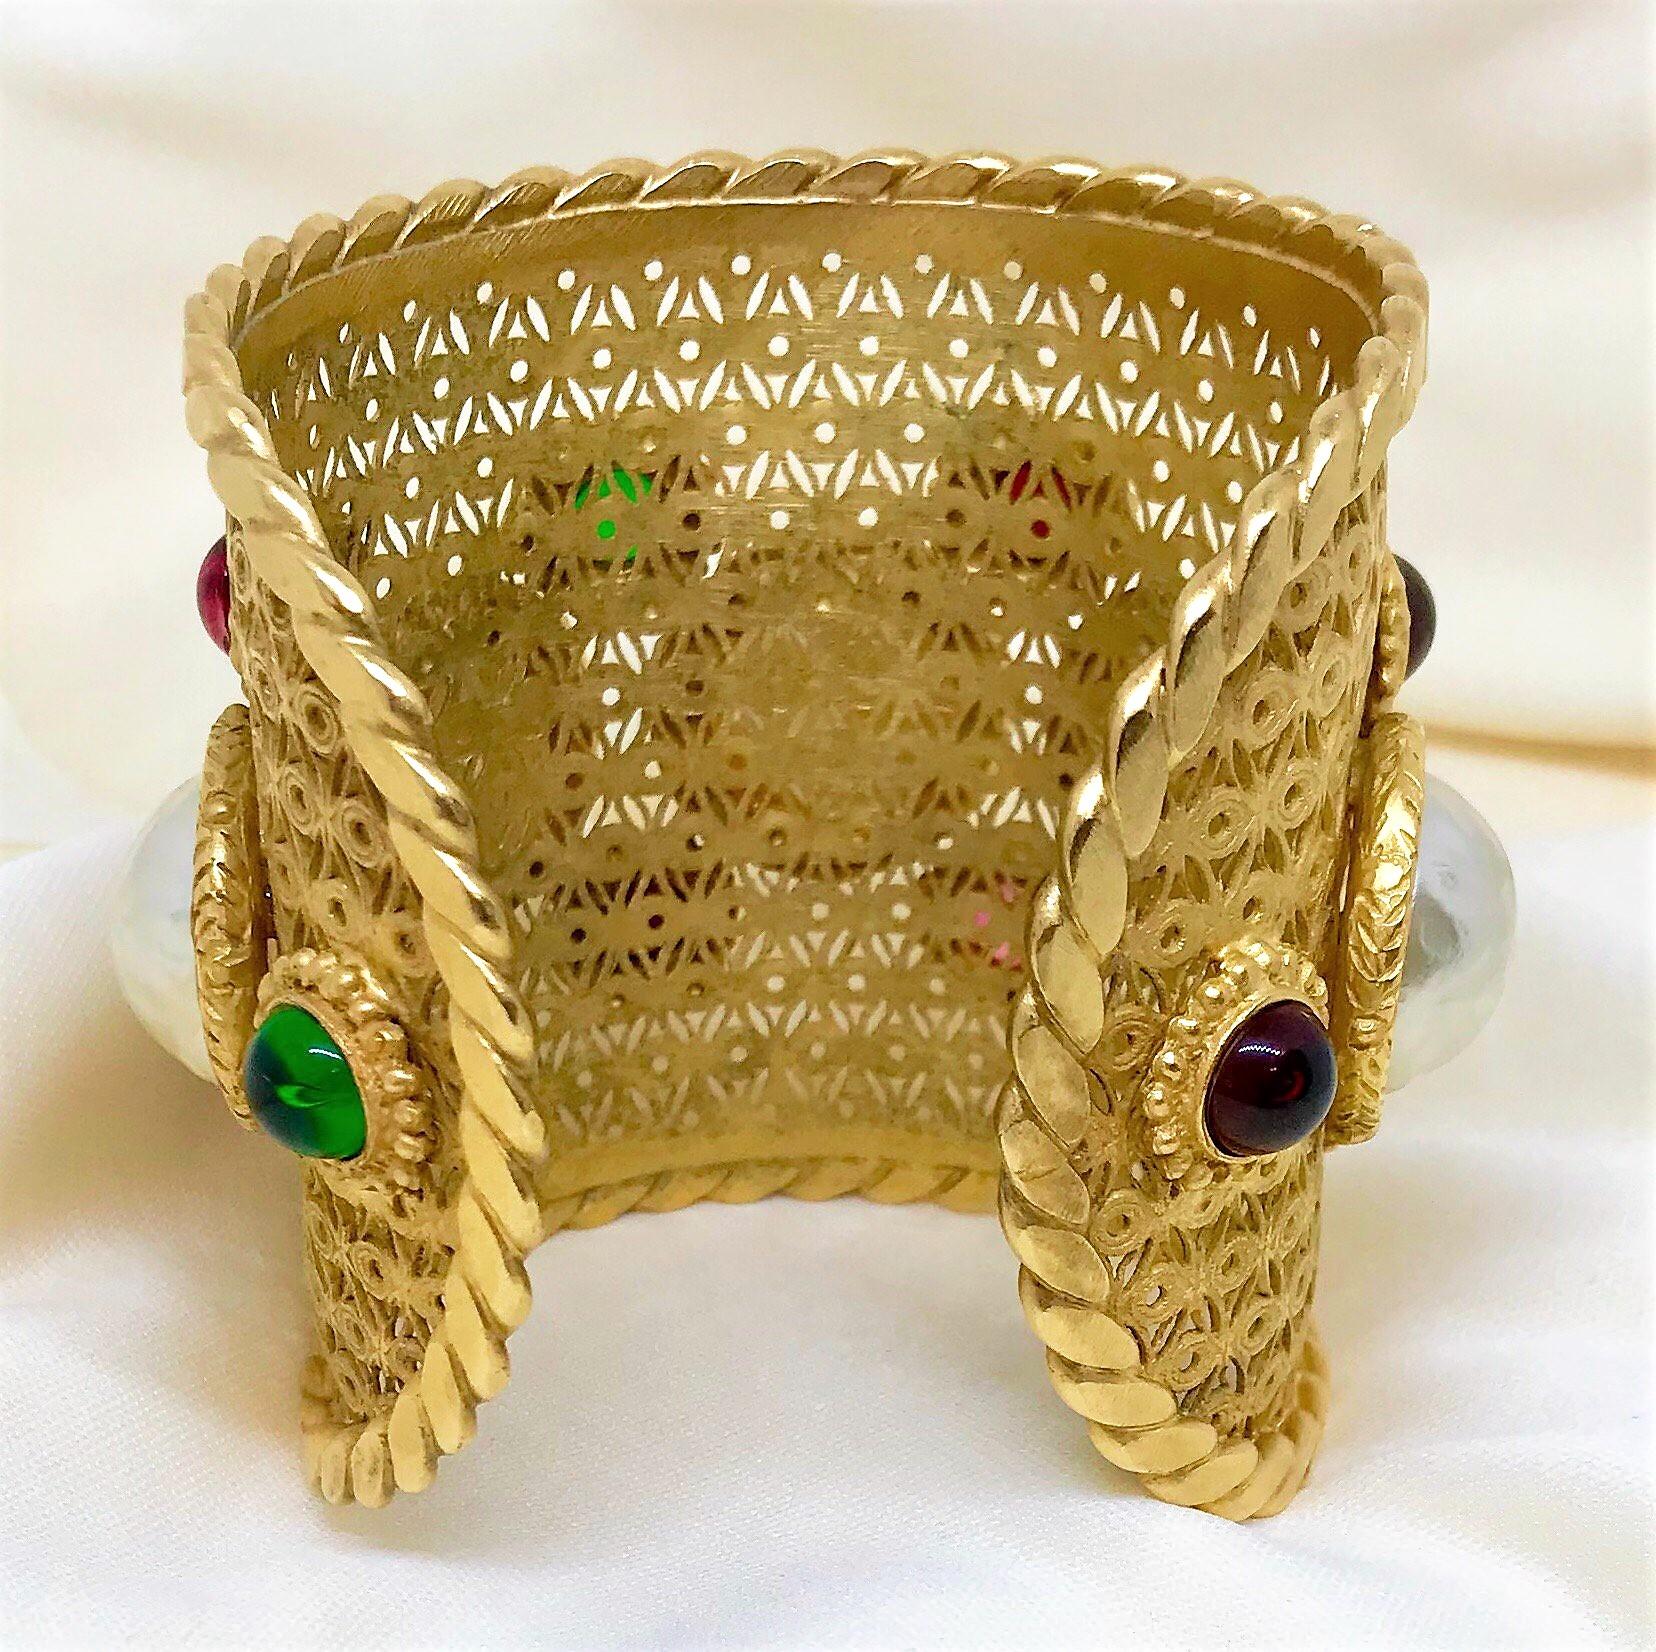 Circa 1980s Deanna Hamro Gold-Plated Faux-Pearl and  Cabochon Jeweled Cuff  2